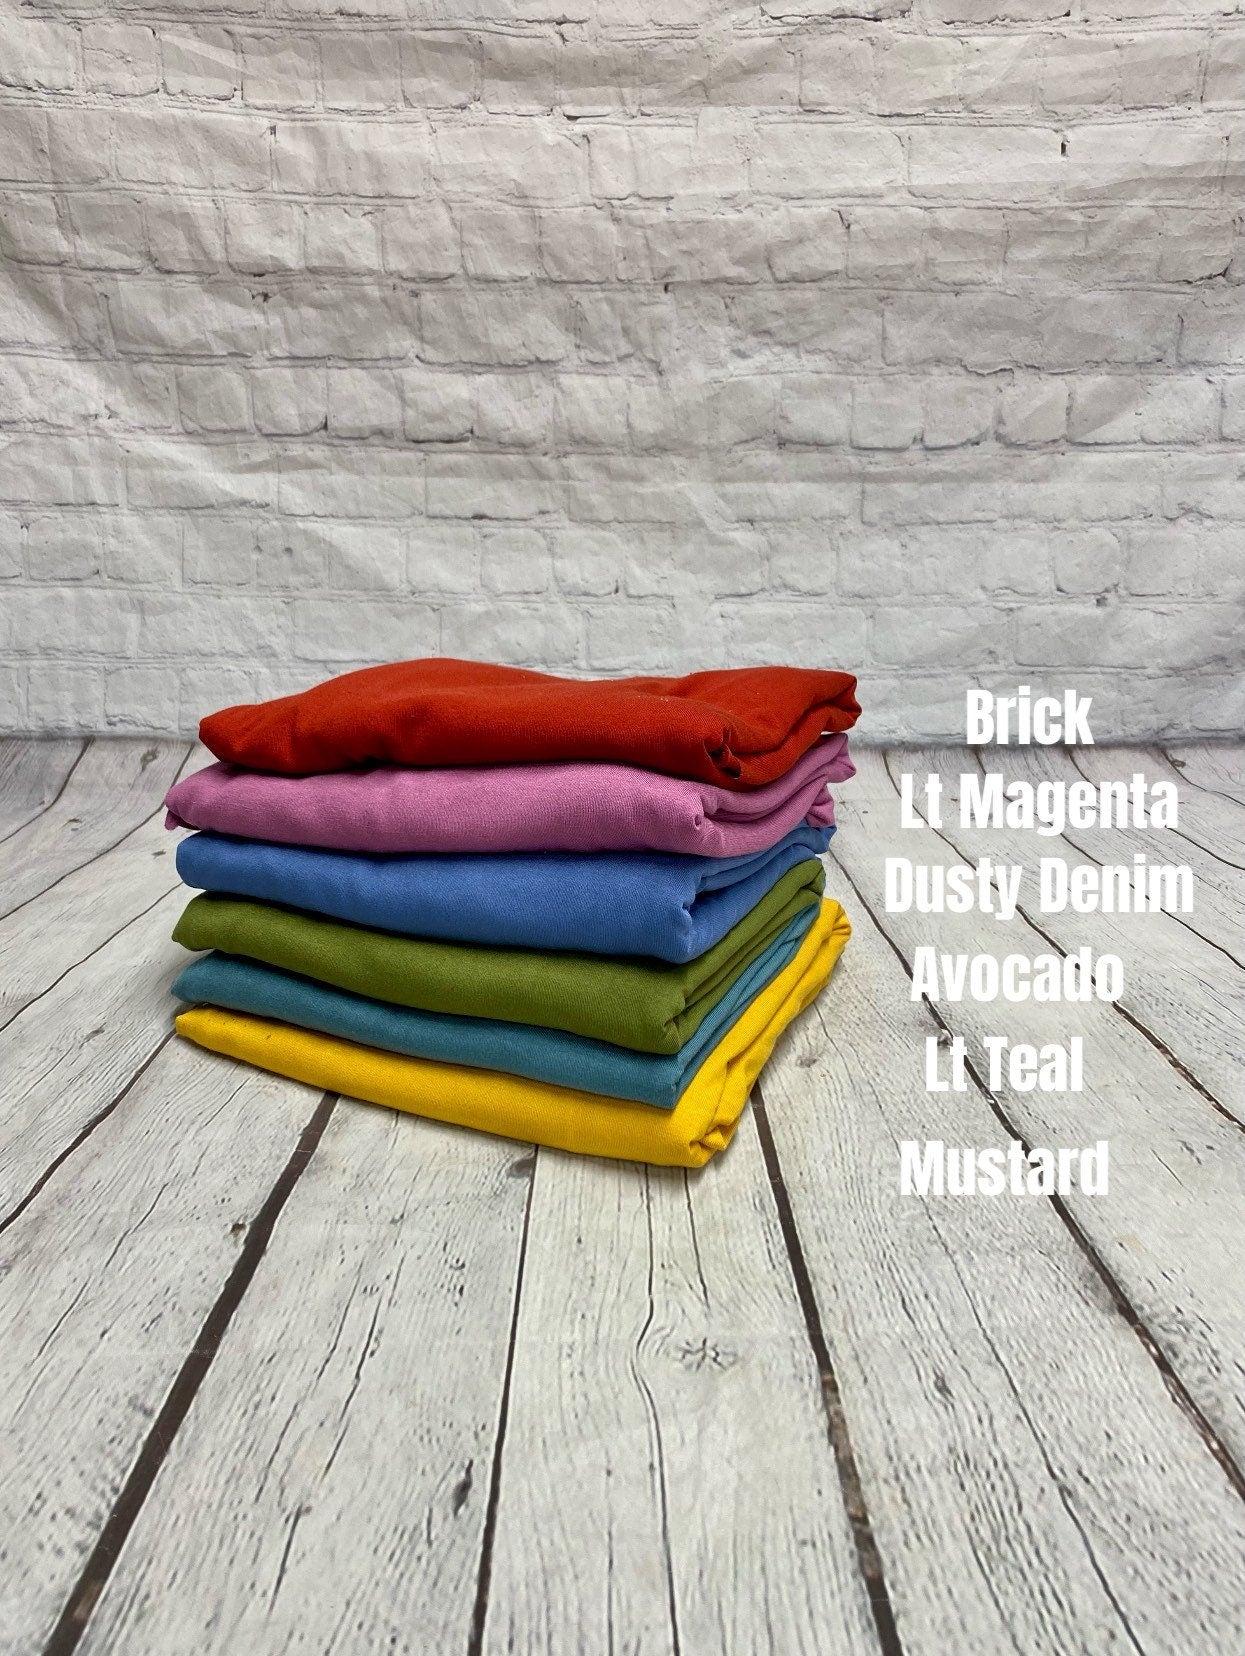 New Rayon Spandex Jersey Knit Fabric By The Yard 200GSM